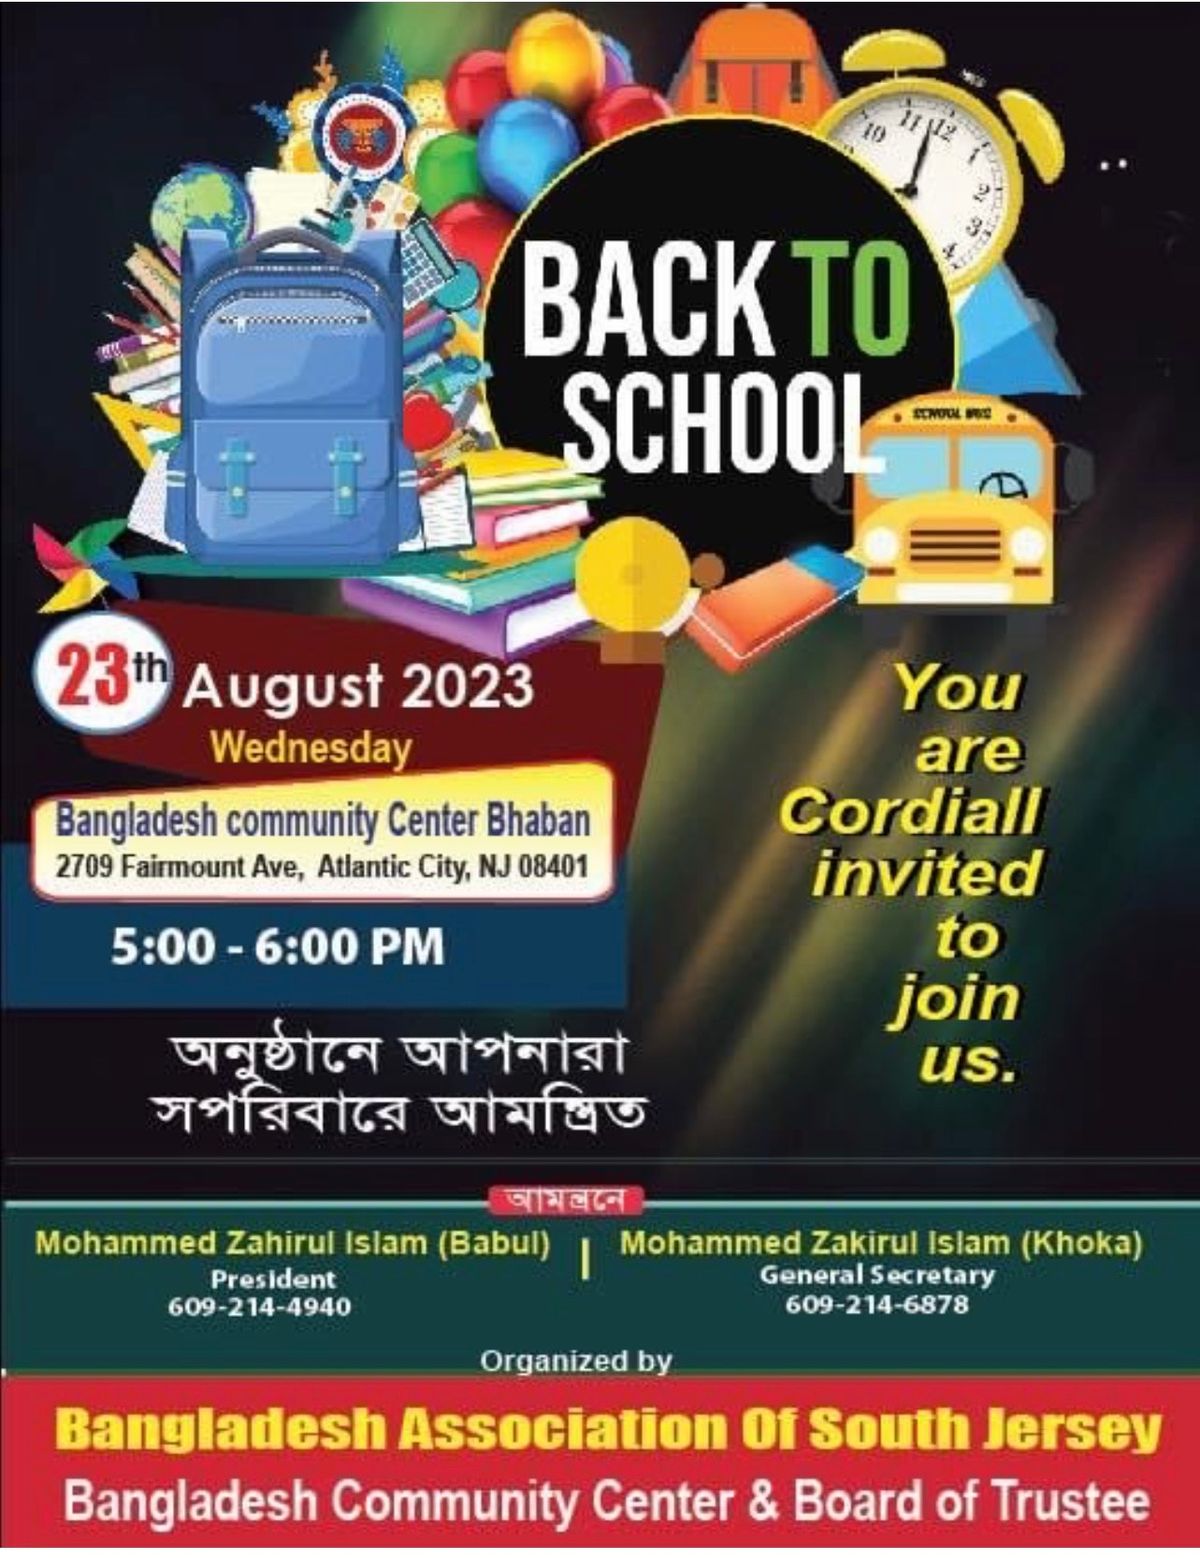 Bangladesh Association of South Jersey to Distribute Free School Supplies